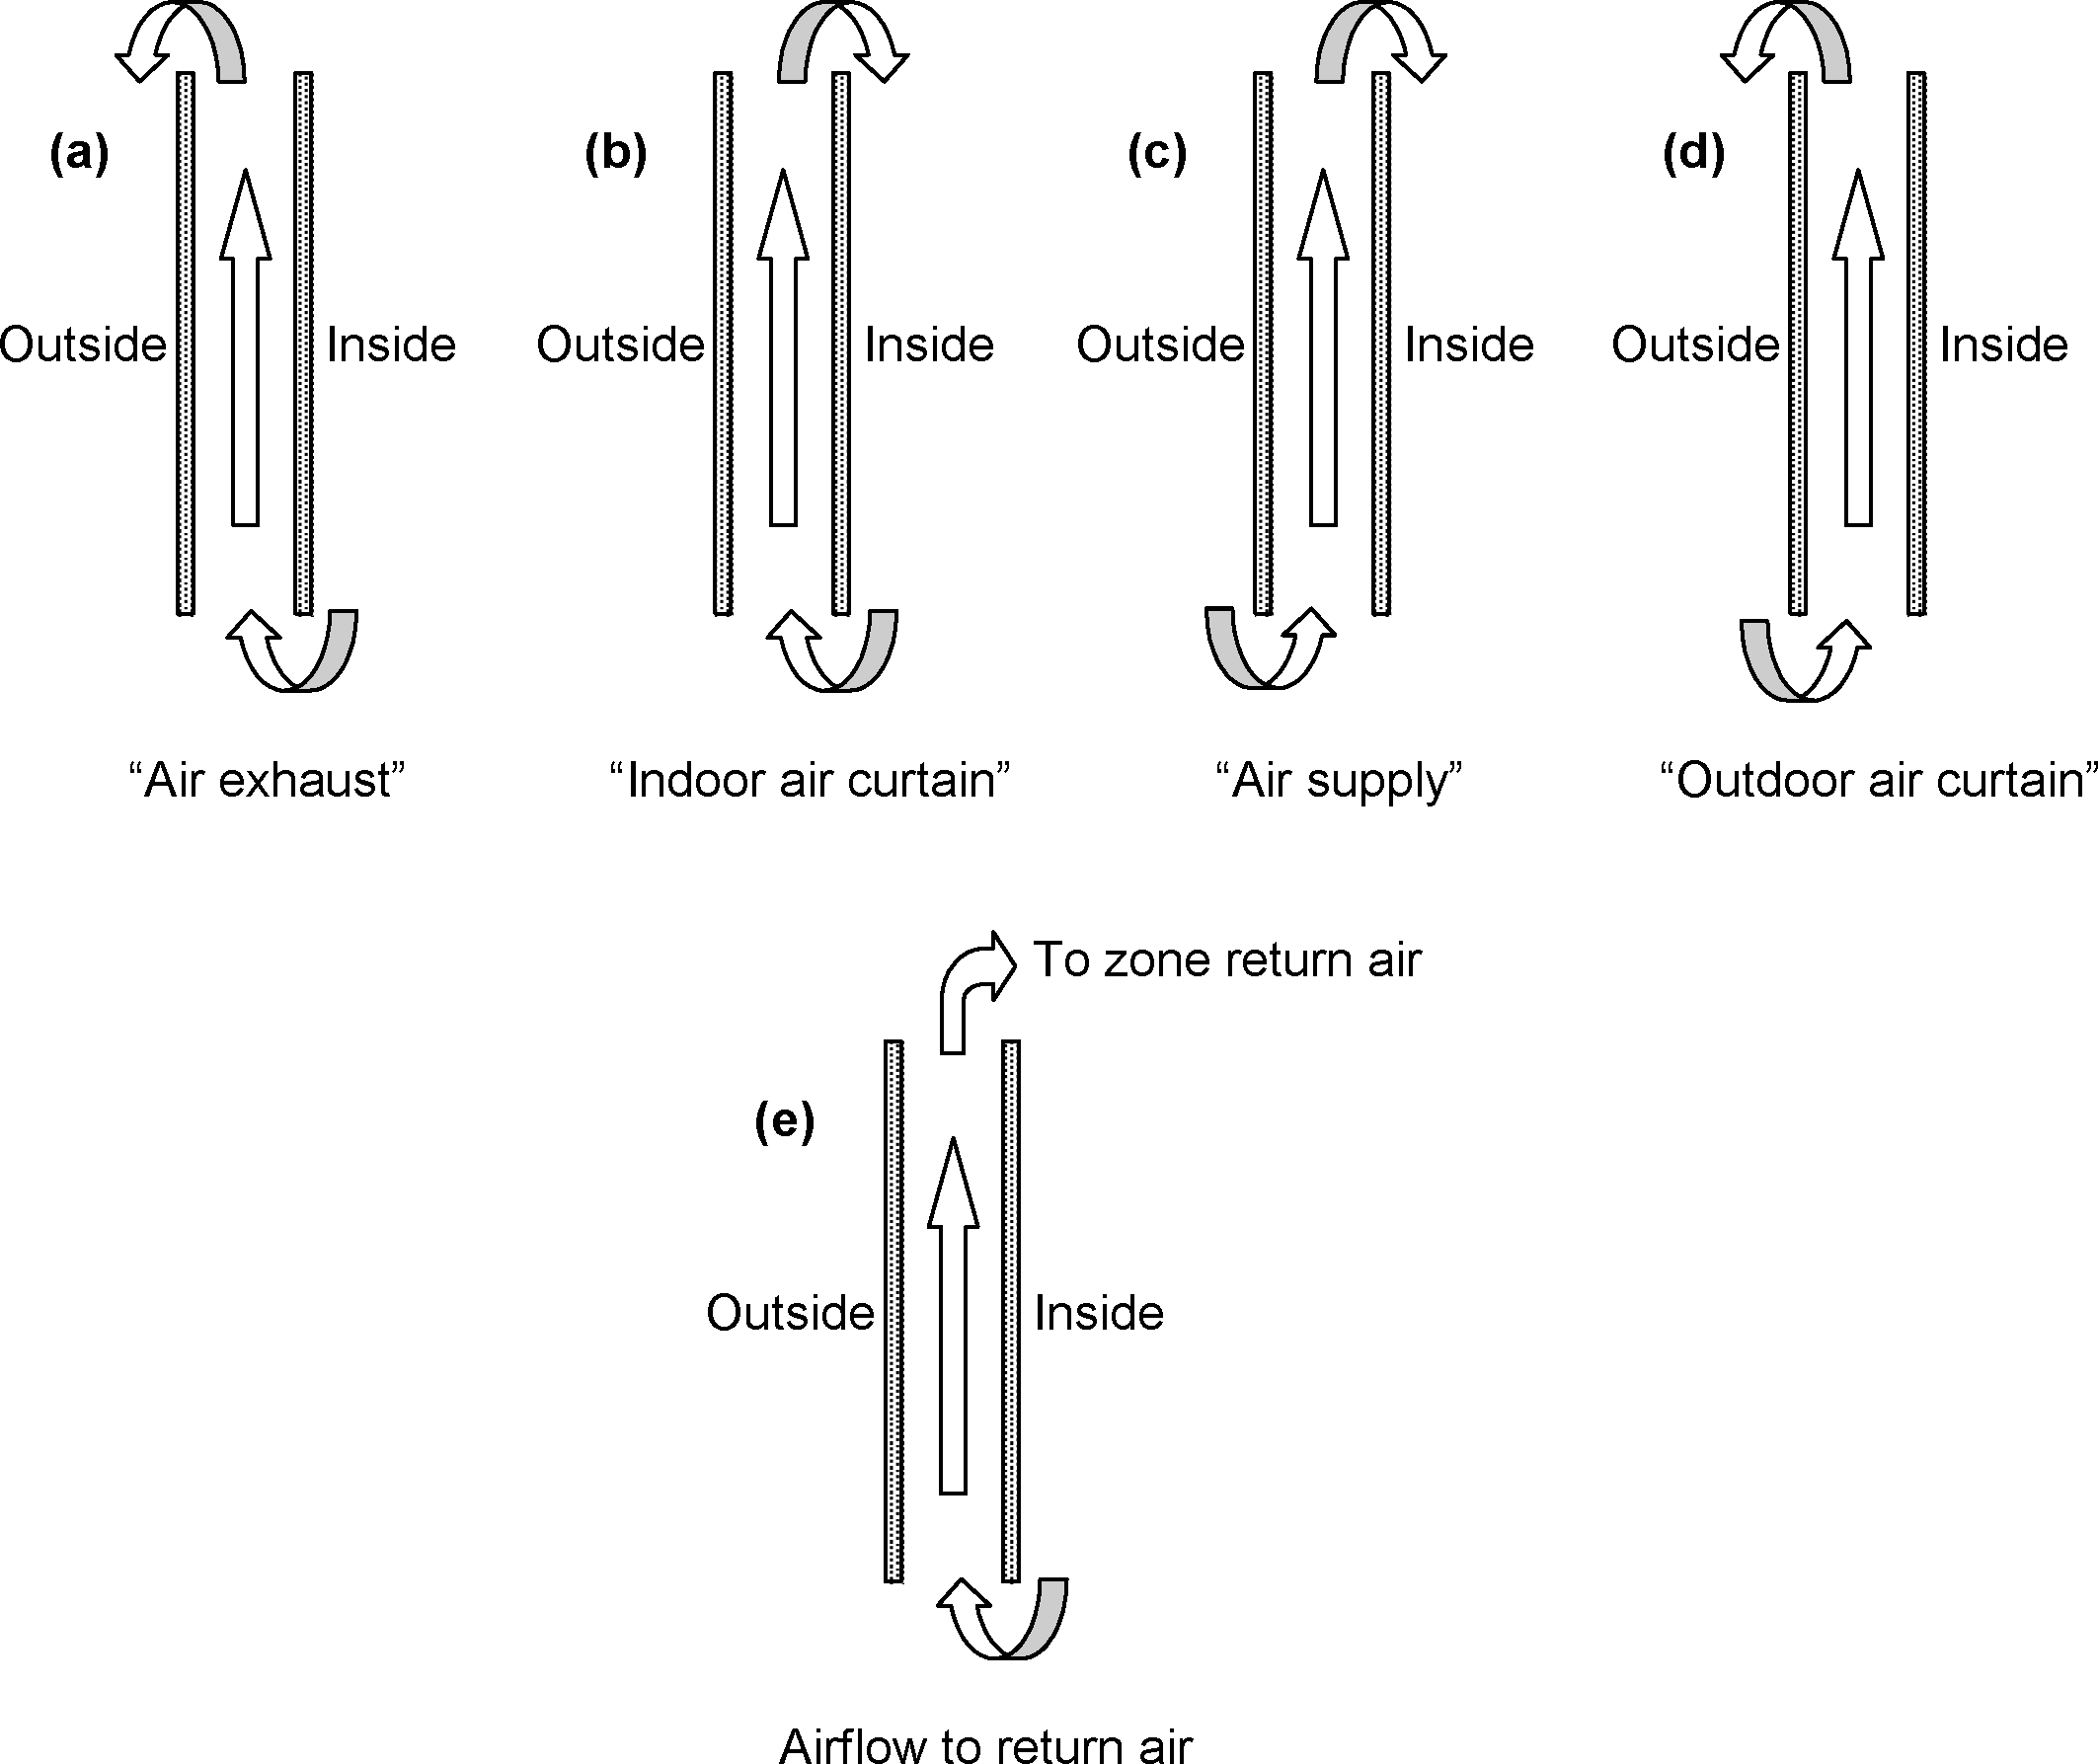 Gap airflow configurations for airflow windows. From Active facades, Version no. 1, Belgian Building Research Institute, June 2002.